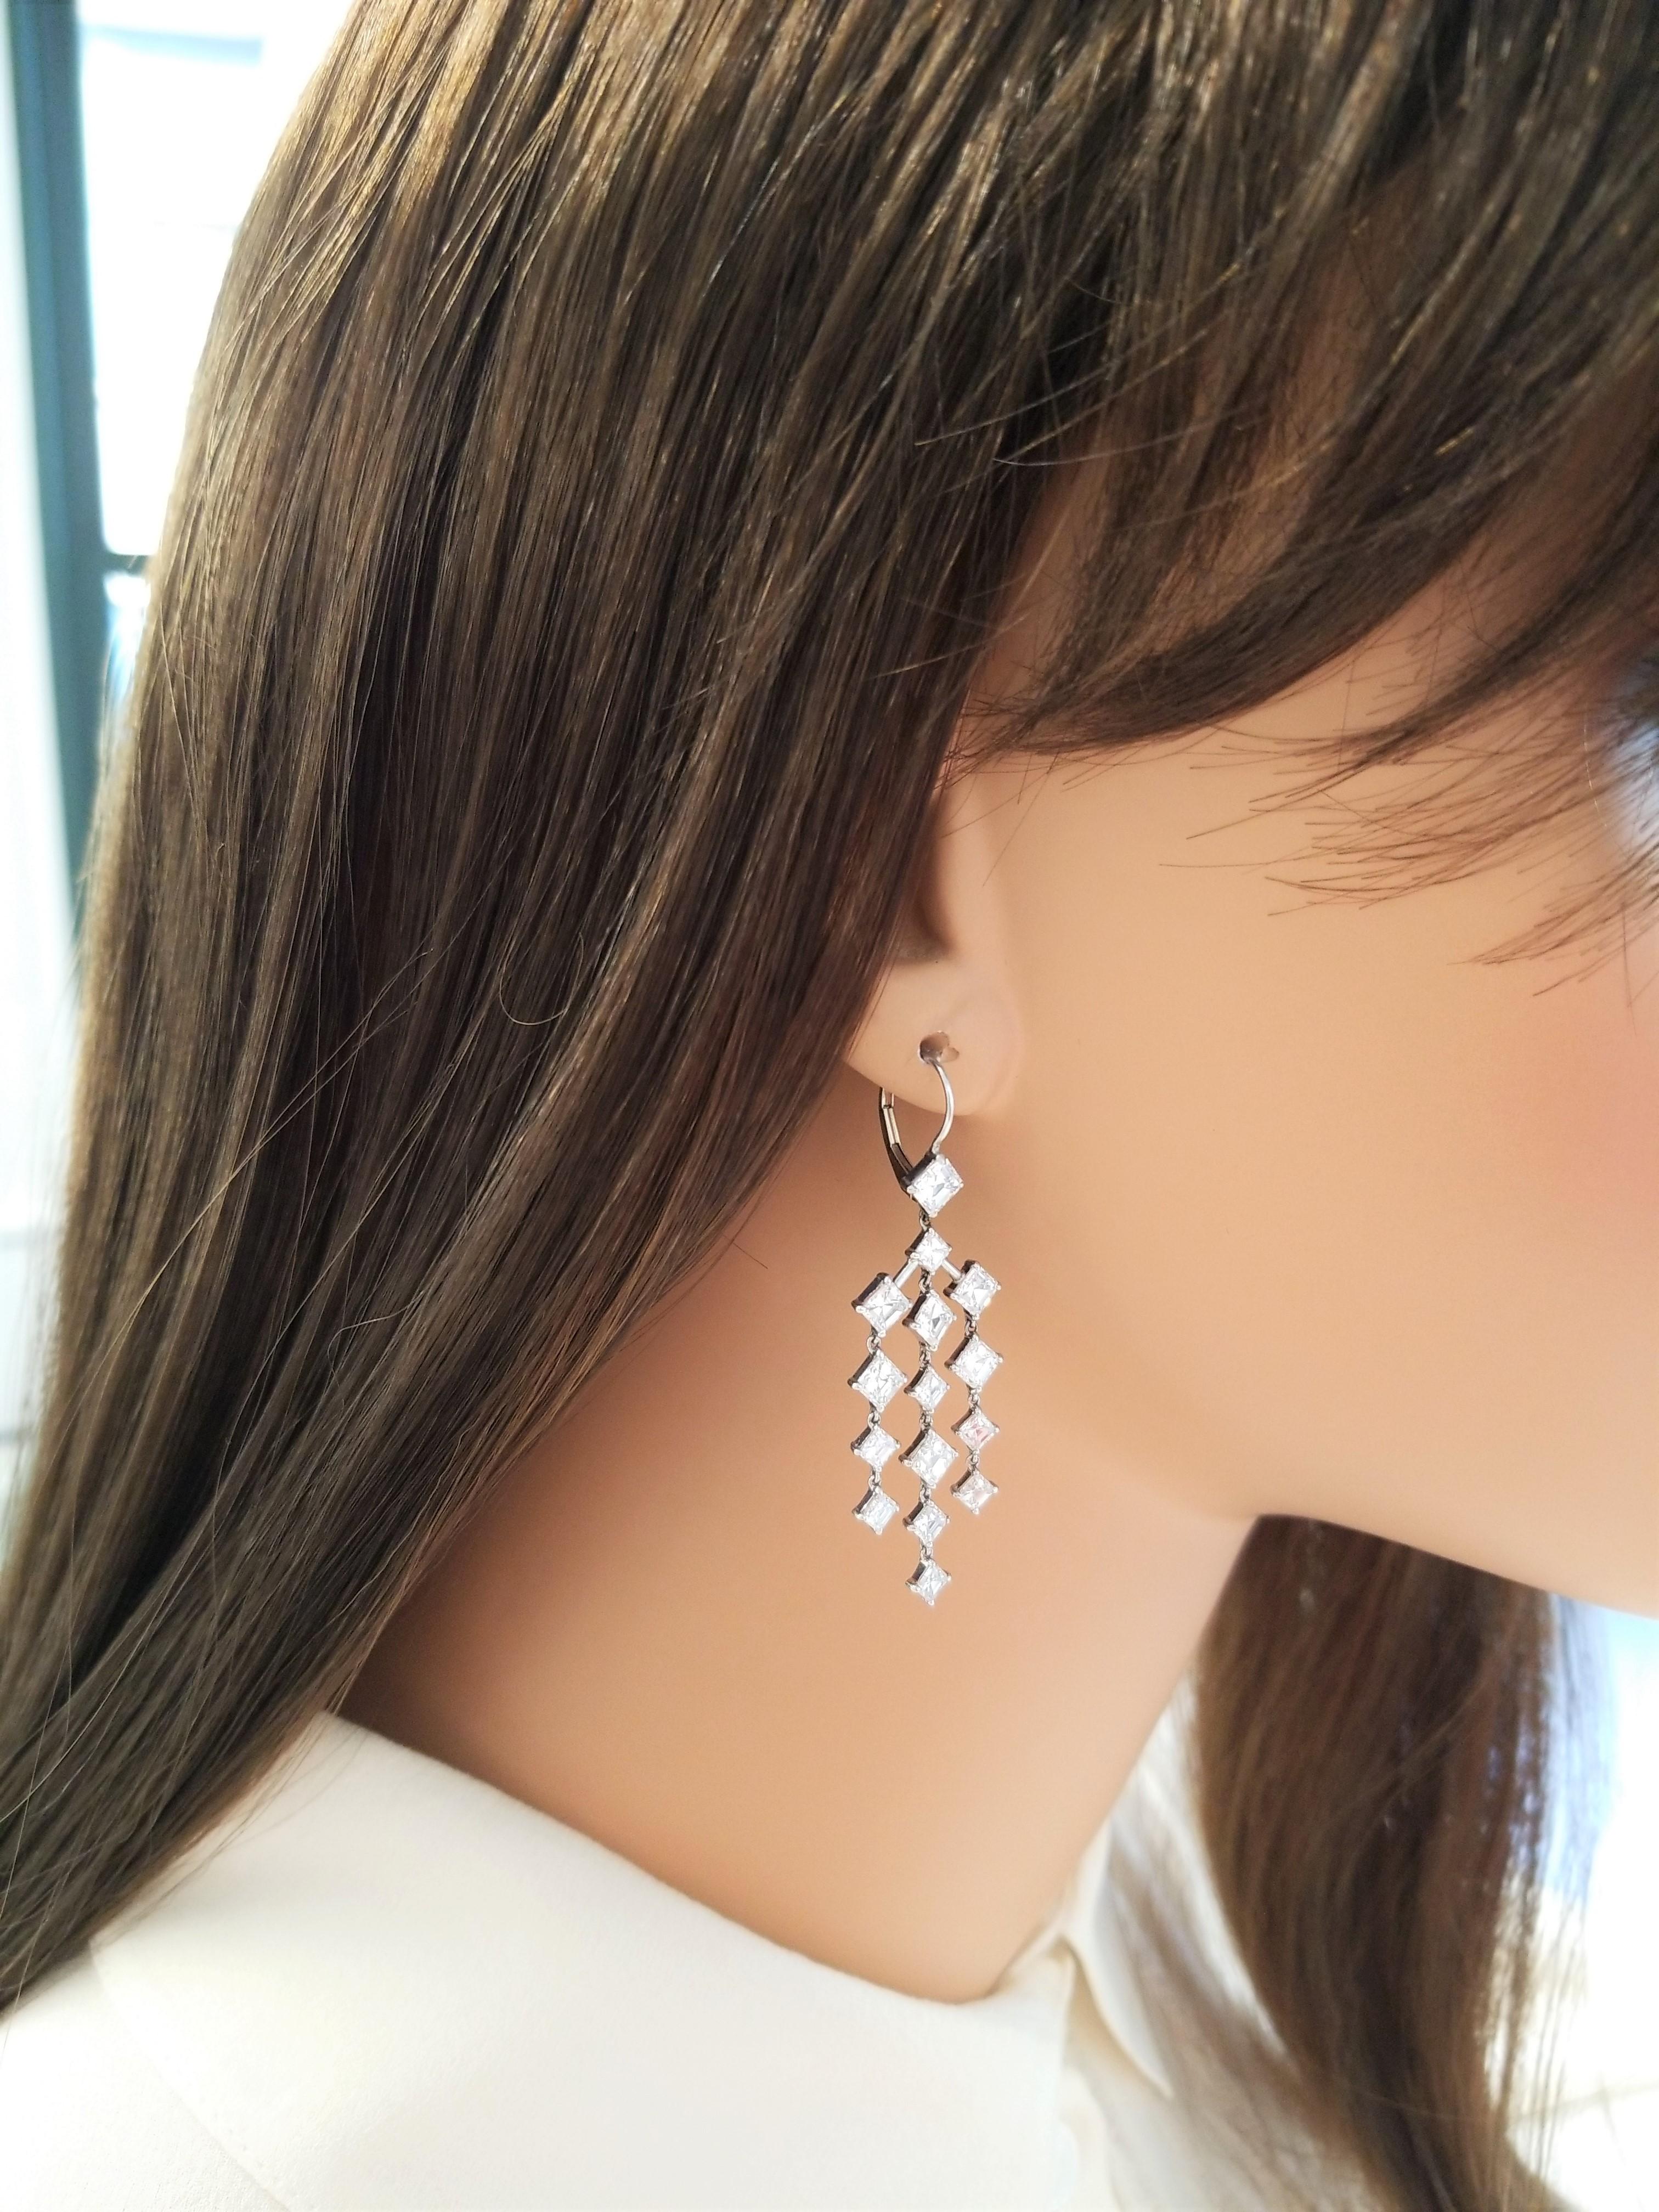 Nothing says elegance like a shimmering pair of chandelier earrings with exceptional movement! Dripping with diamonds in the most stunning way possible, these exquisite handcrafted designer earrings are the perfect earrings to be worn with your hair